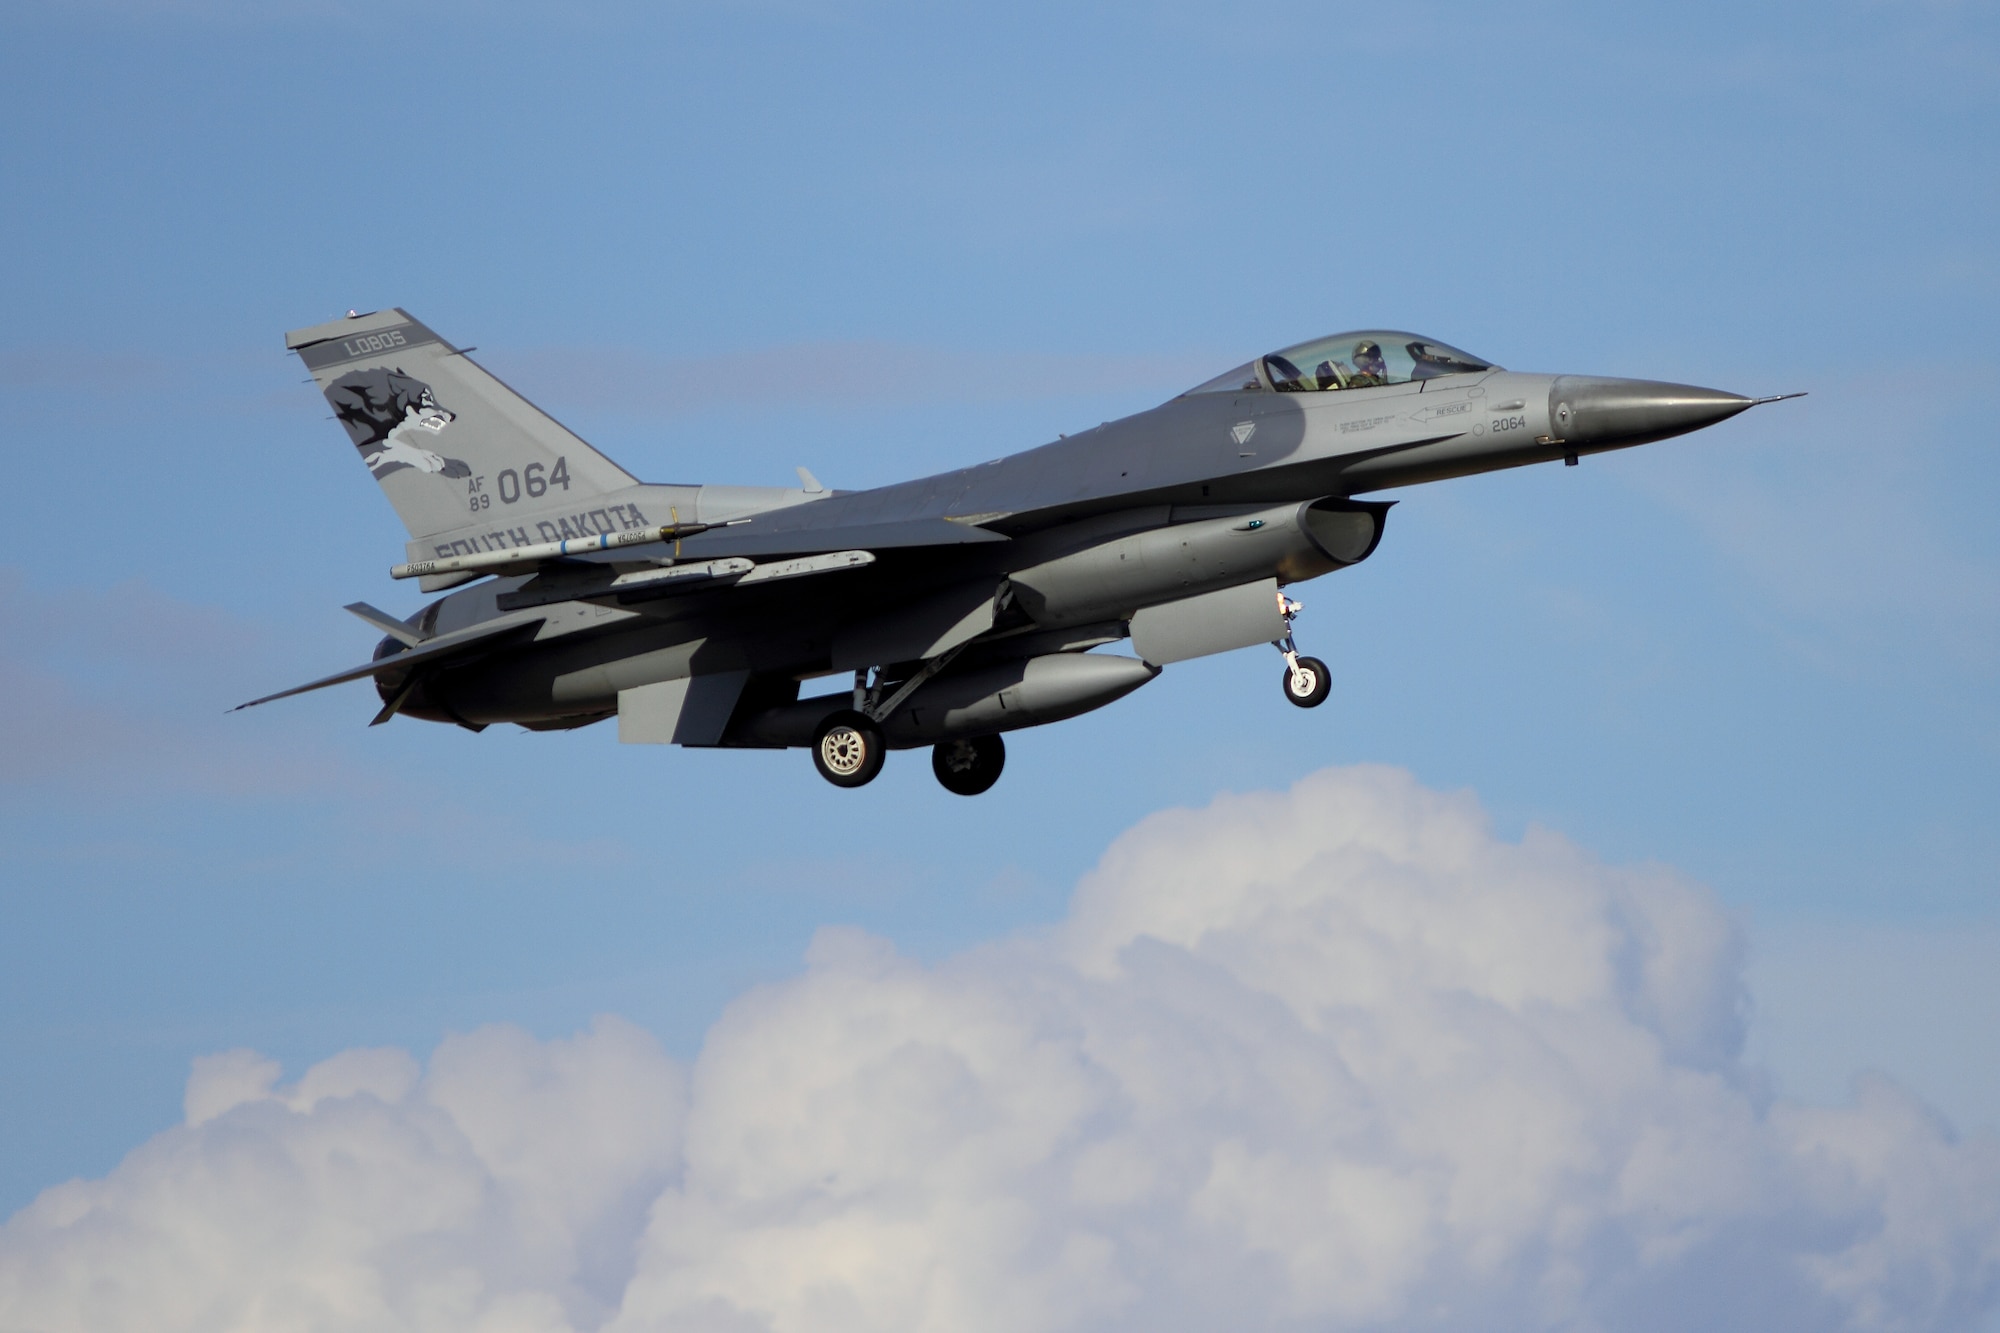 TYNDALL AFB, Fla. -  A 114th Fighter Wing, South Dakota Air National Guard F-16 aircraft approaches for a landing at Tyndall Air Force Base, Fla. Feb. 1, 2012.  The unit is in Florida to participate in Combat Archer for a two week deployment.  The exercise allows pilots and crew of the unit to train and be evaluated with live munitions.(Photo courtesy of Attila Papp, Hot Ramp Photography, Ontario, Canada)